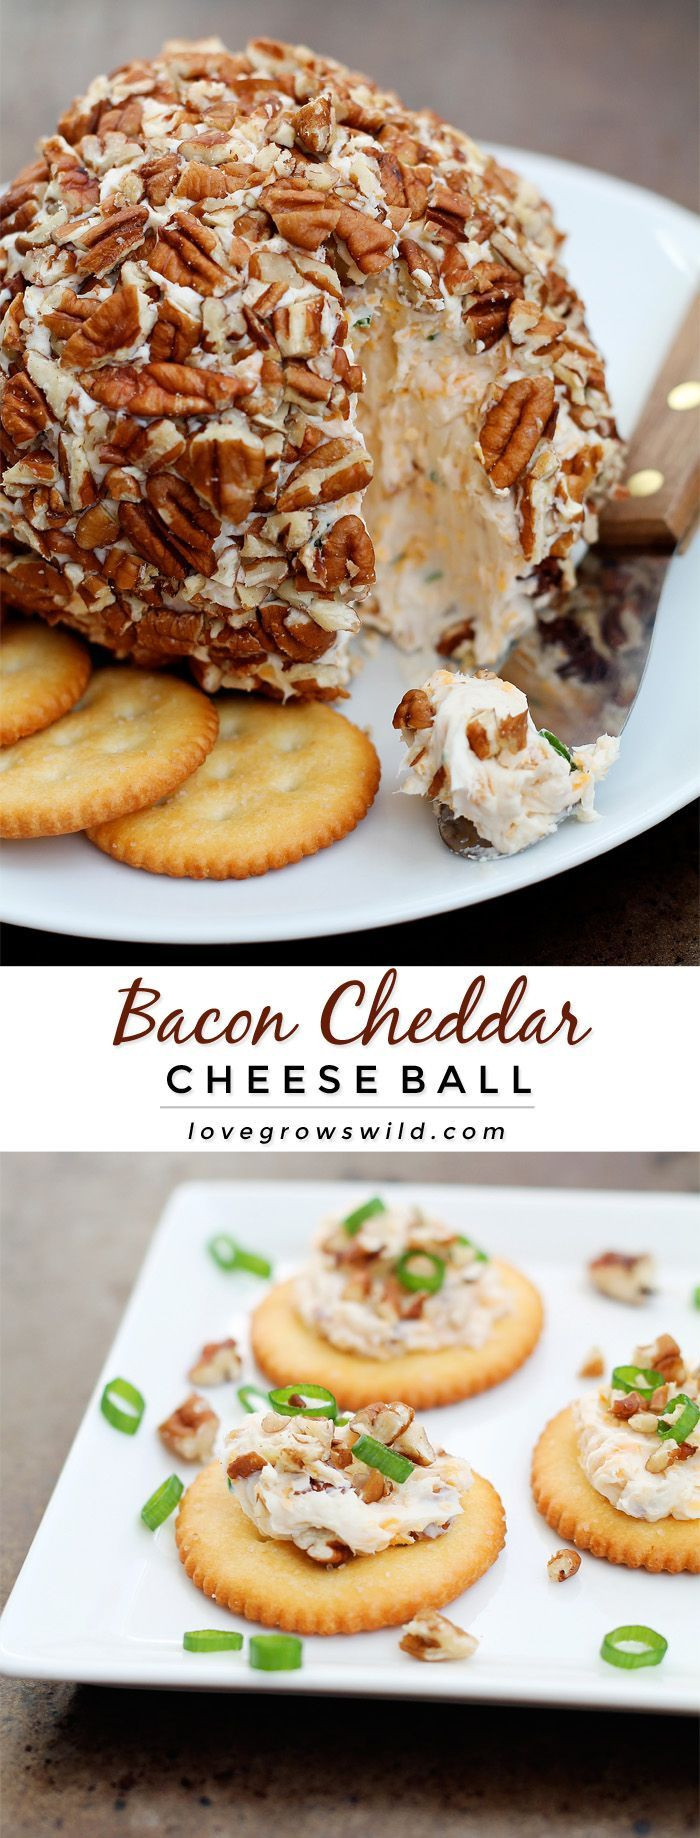 Cheddar Cheese Appetizers
 Bacon Cheddar Cheese Ball Recipe